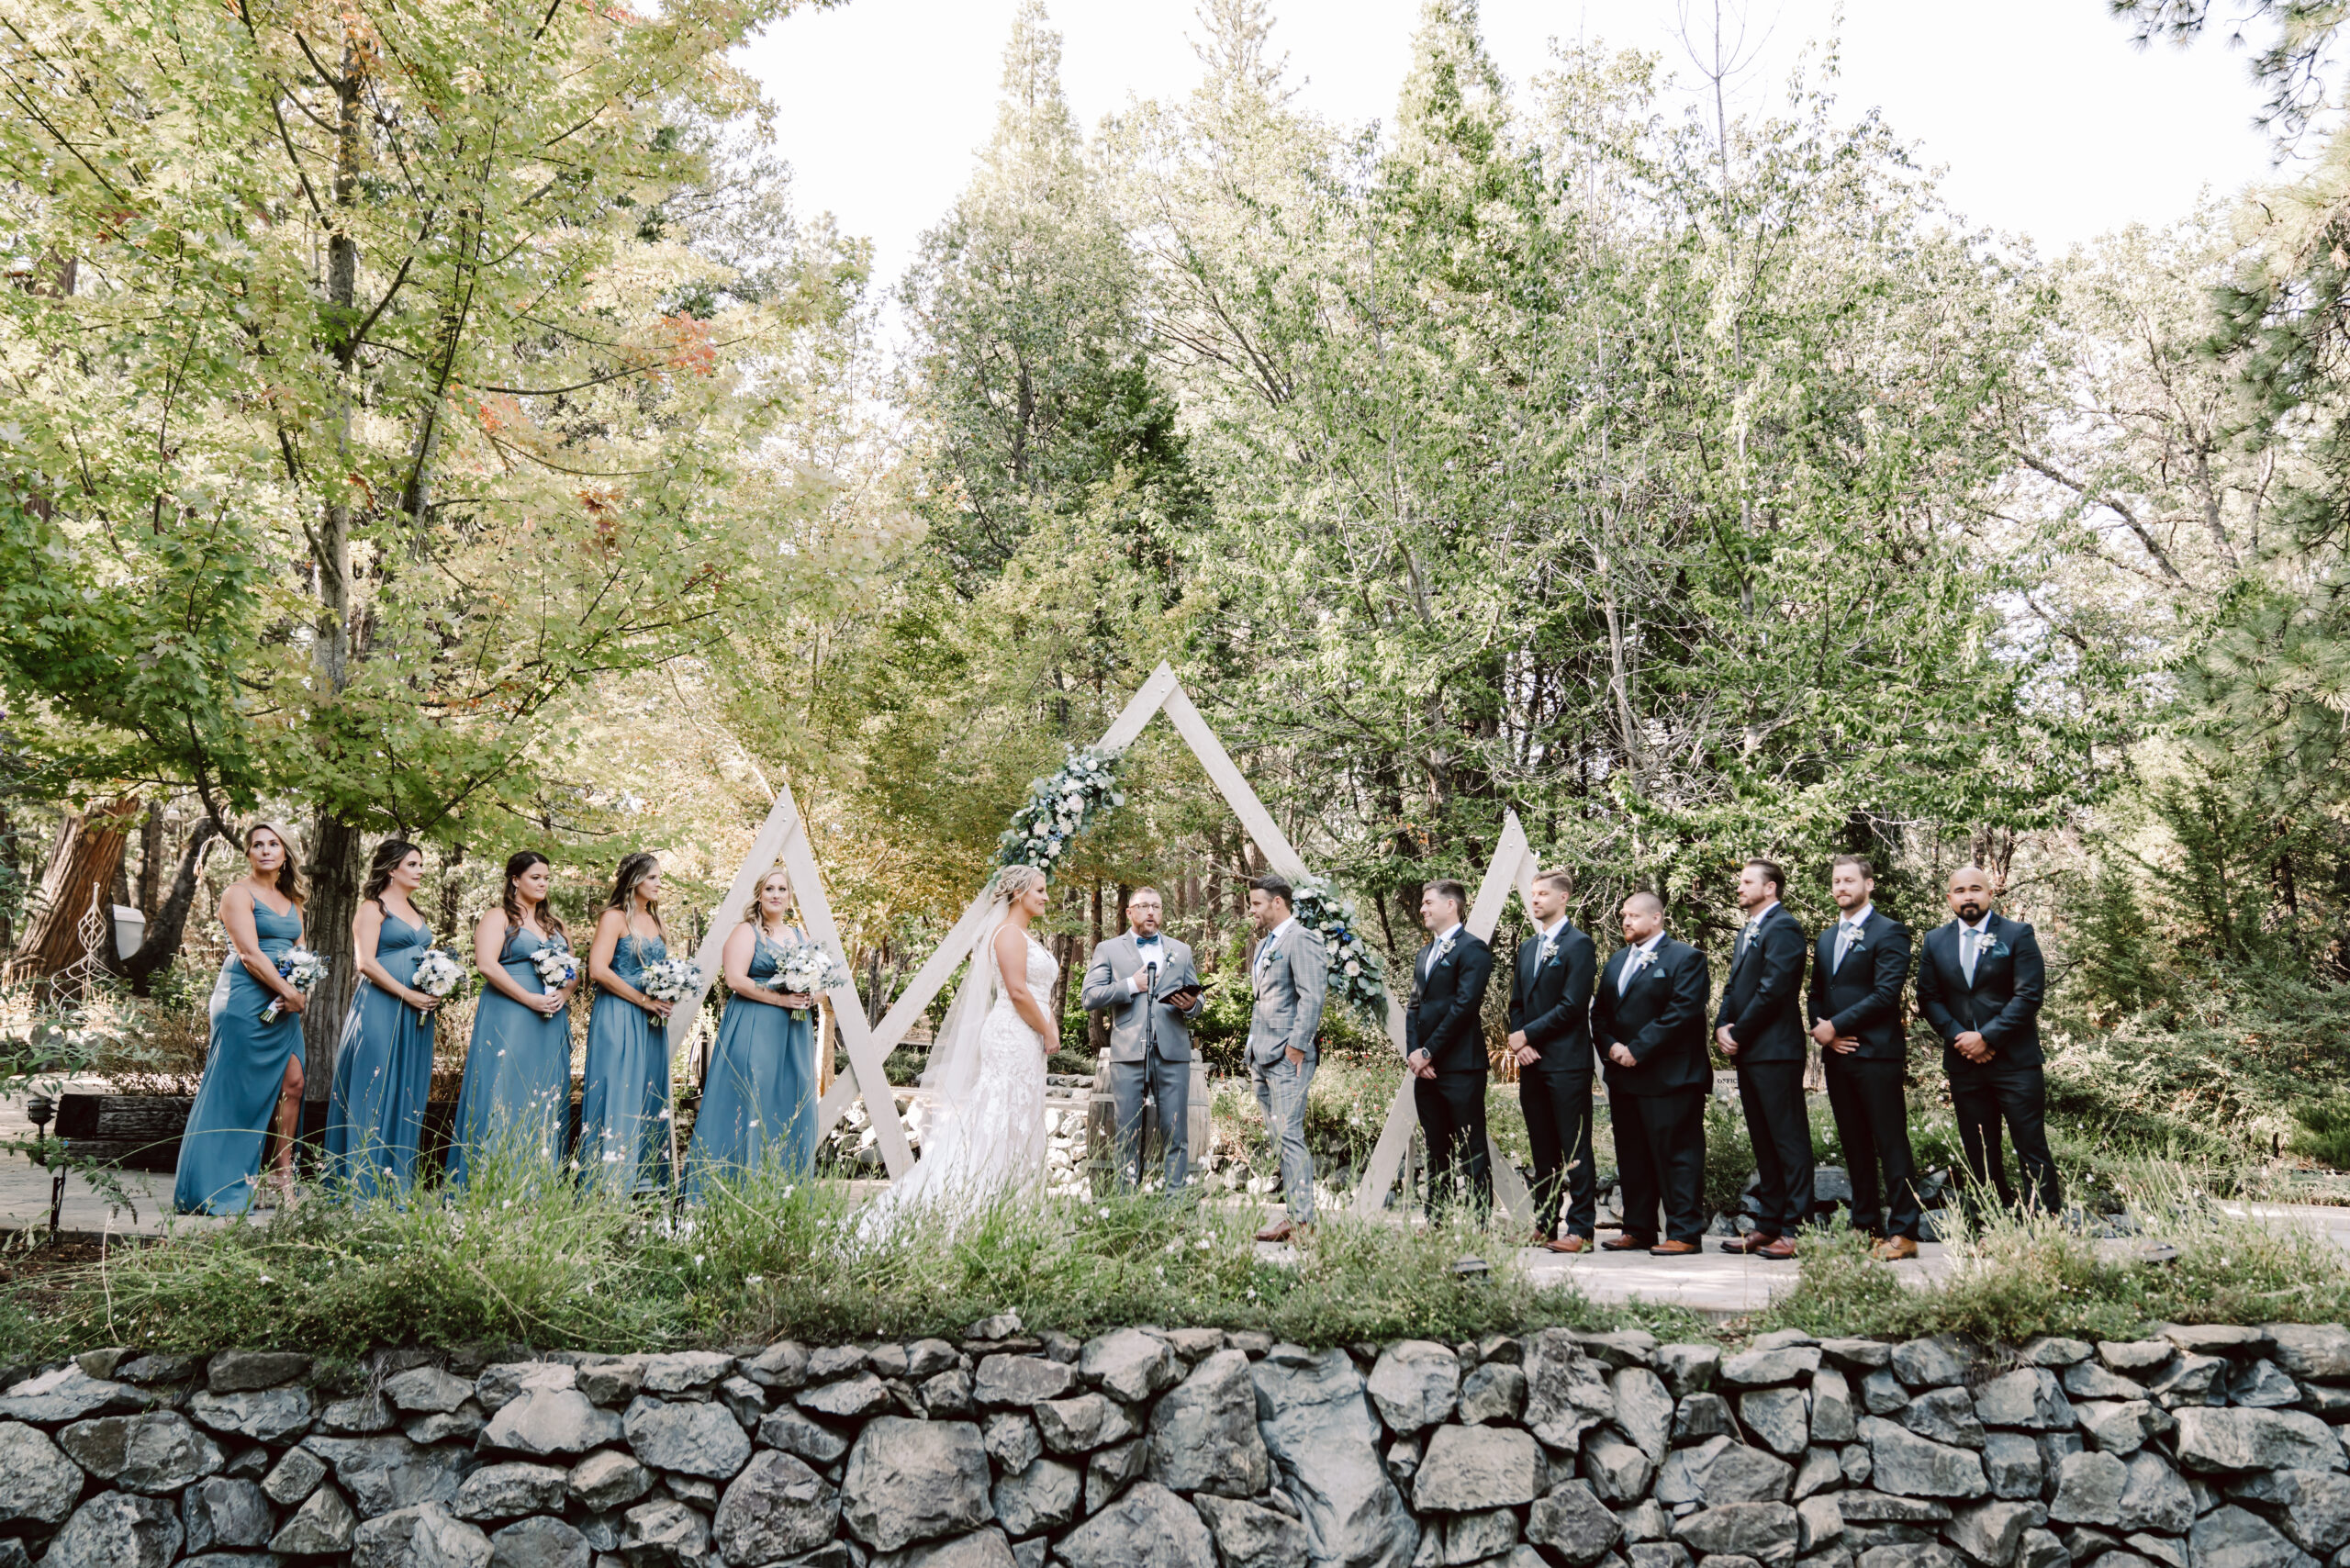 Wedding ceremony at the Roth Estate in Nevada City